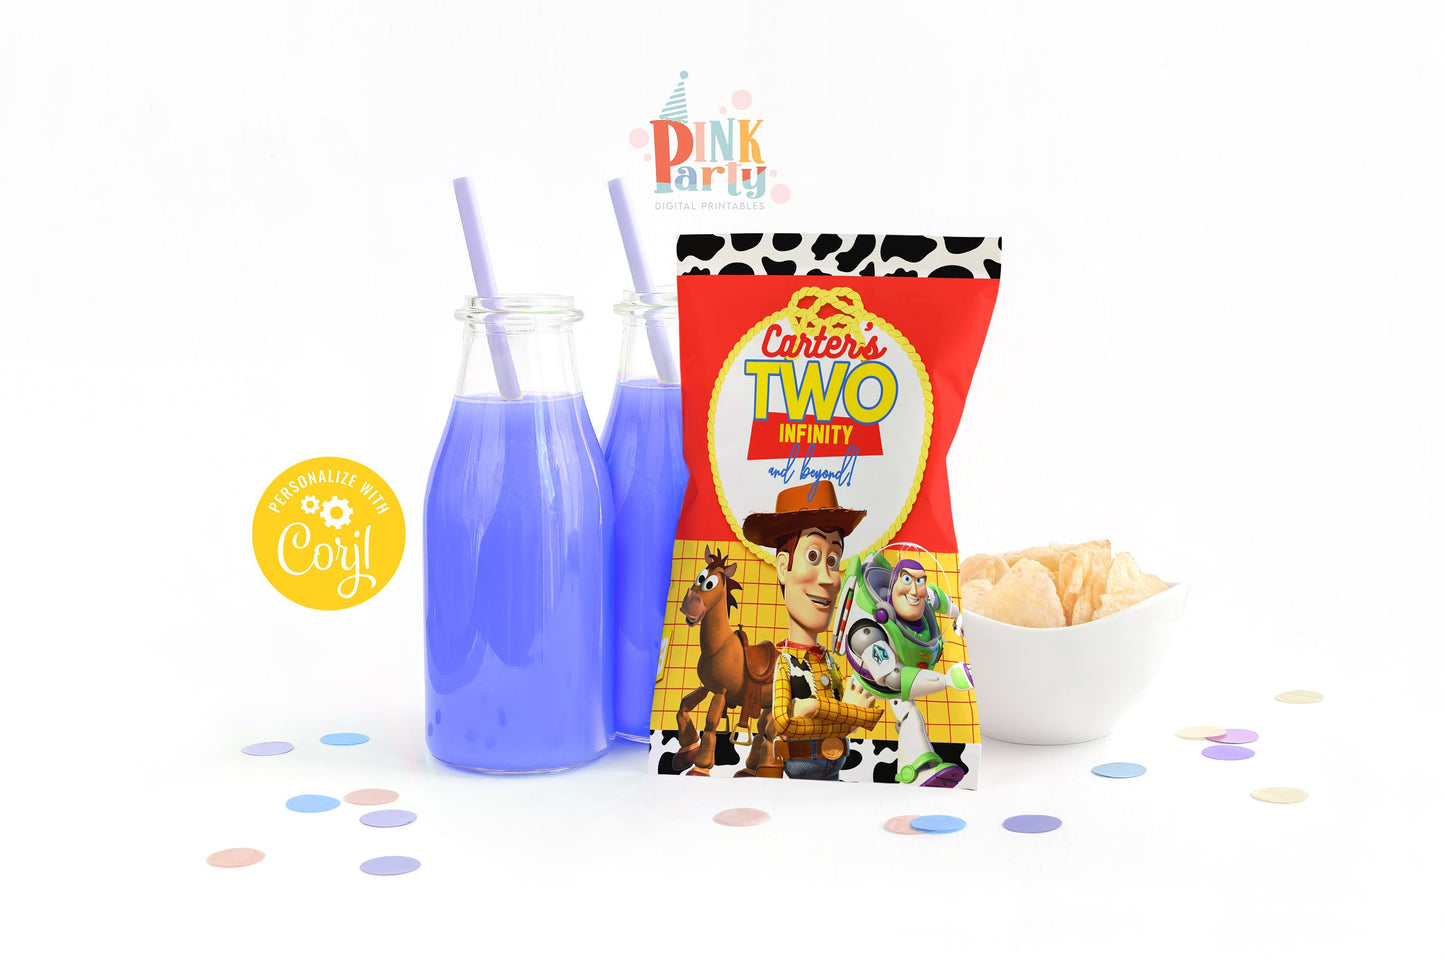 TOY STORY CHIP BAG WRAPPER EDITABLE TEMPLATE